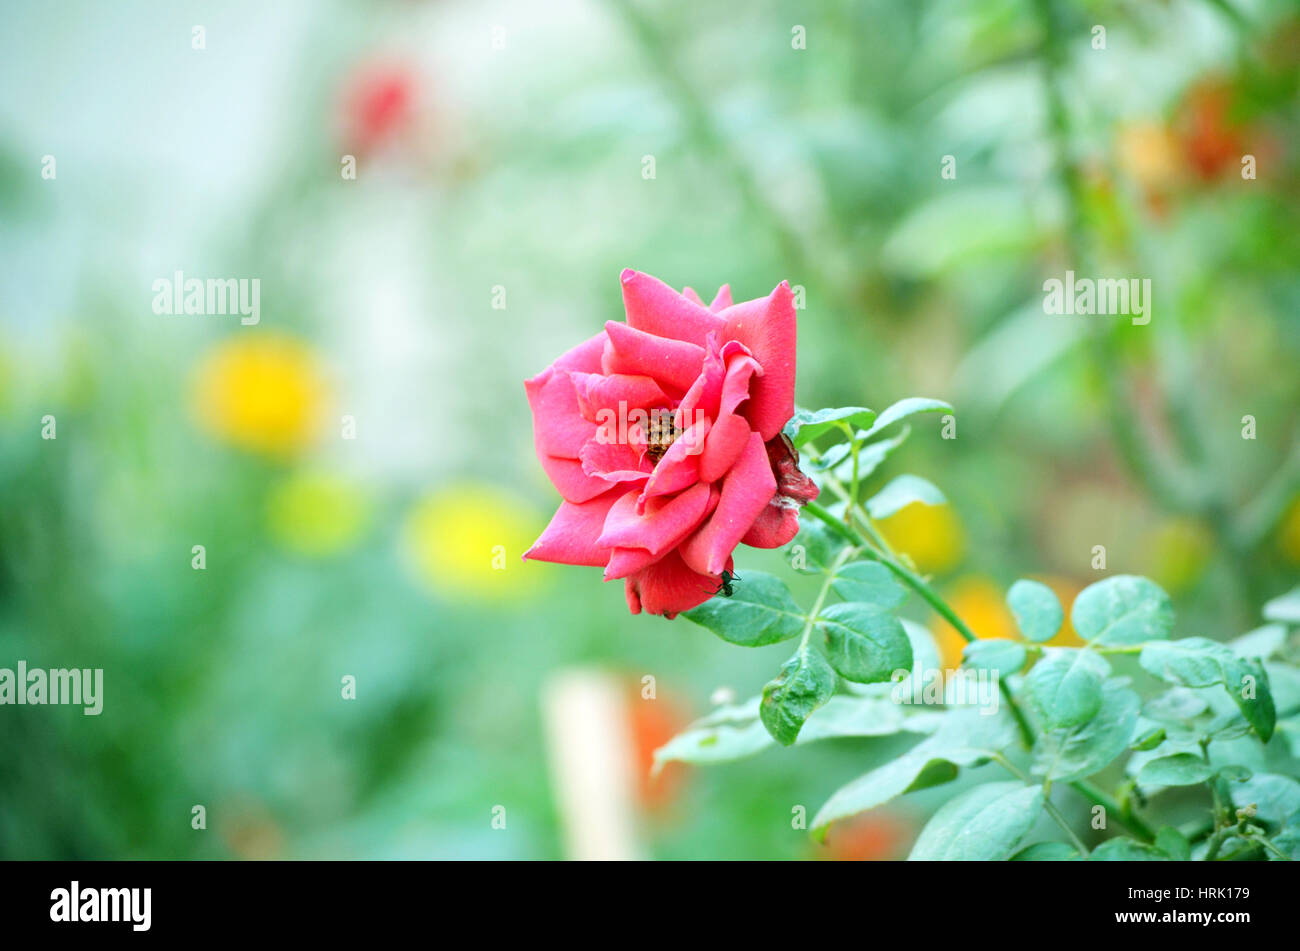 Pink color rose isolate green leaf background Stock Photo